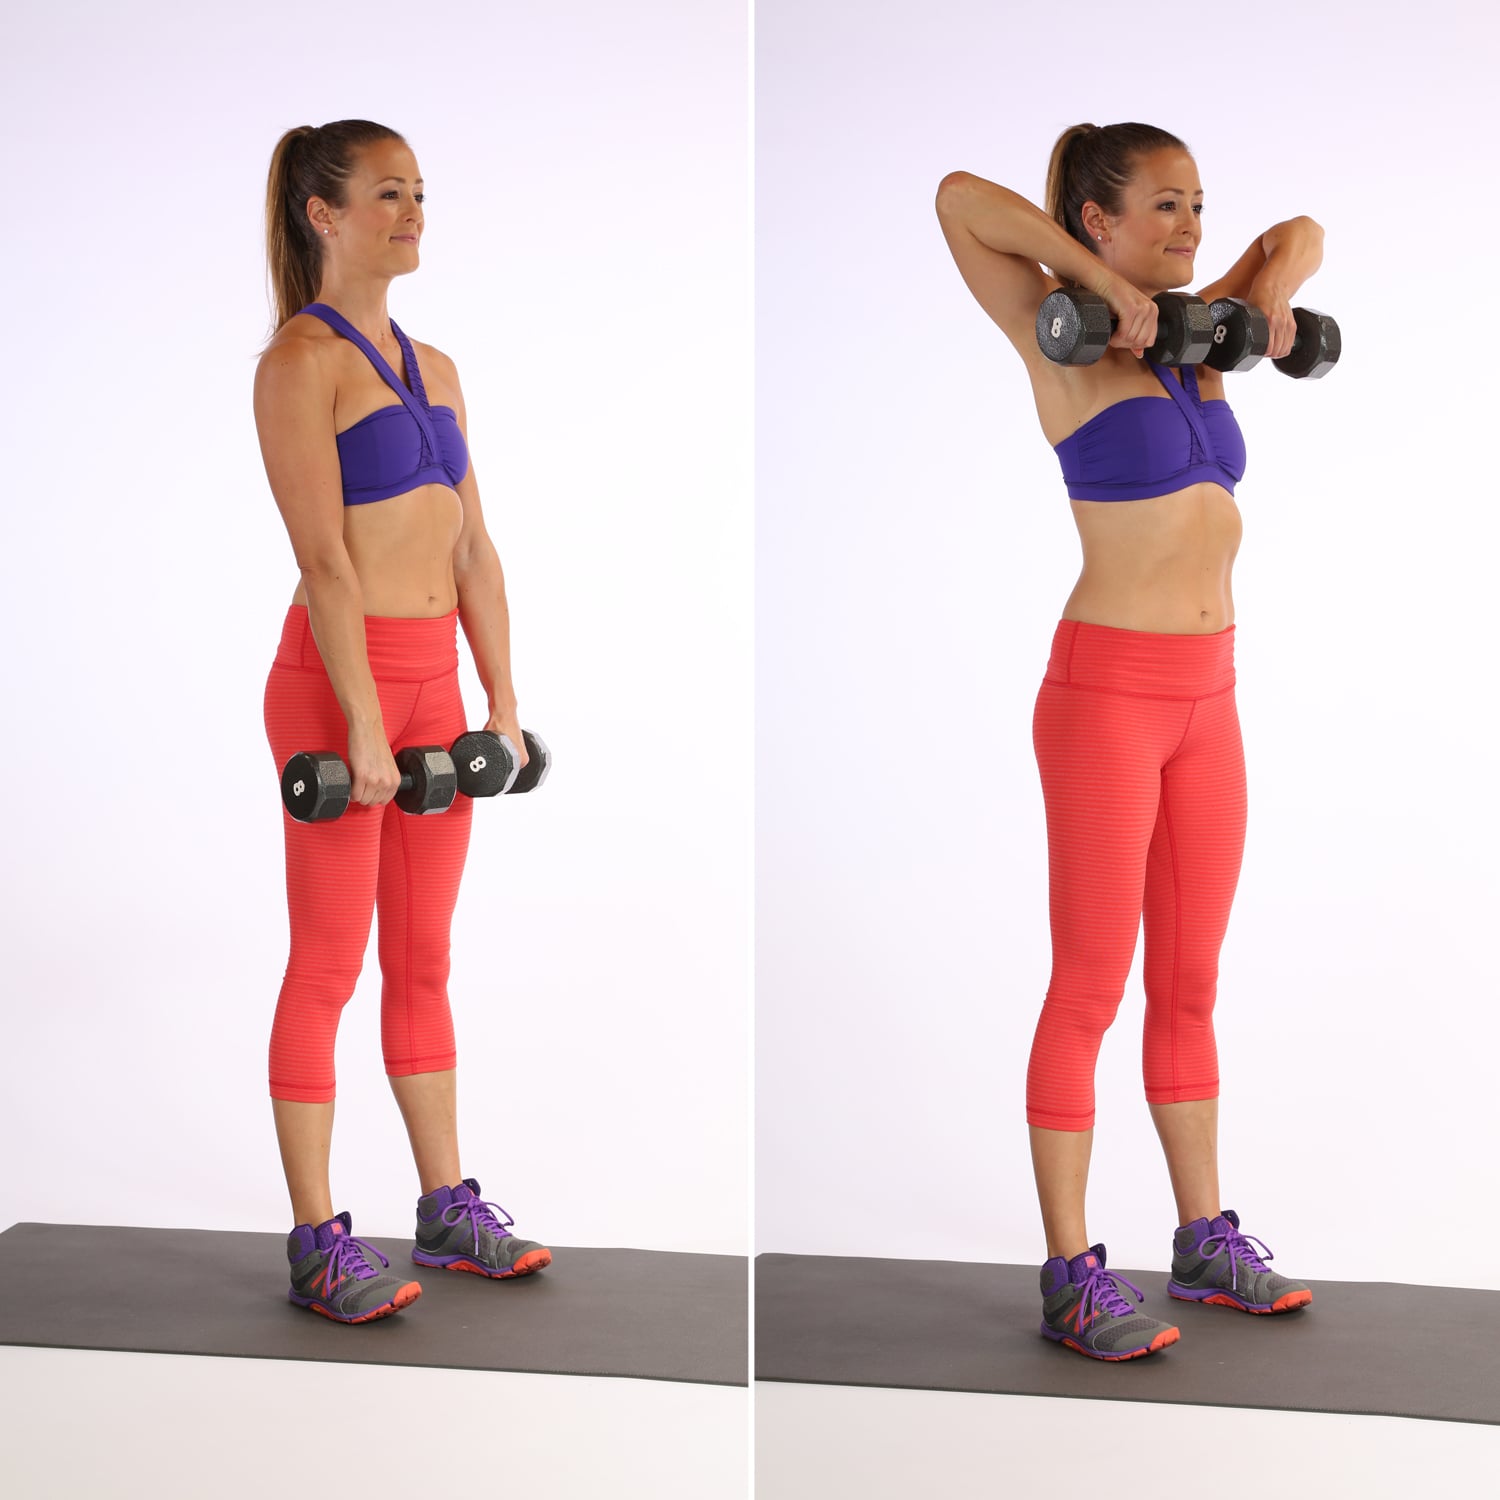 Best Arm Exercises - Arm Workouts for Women